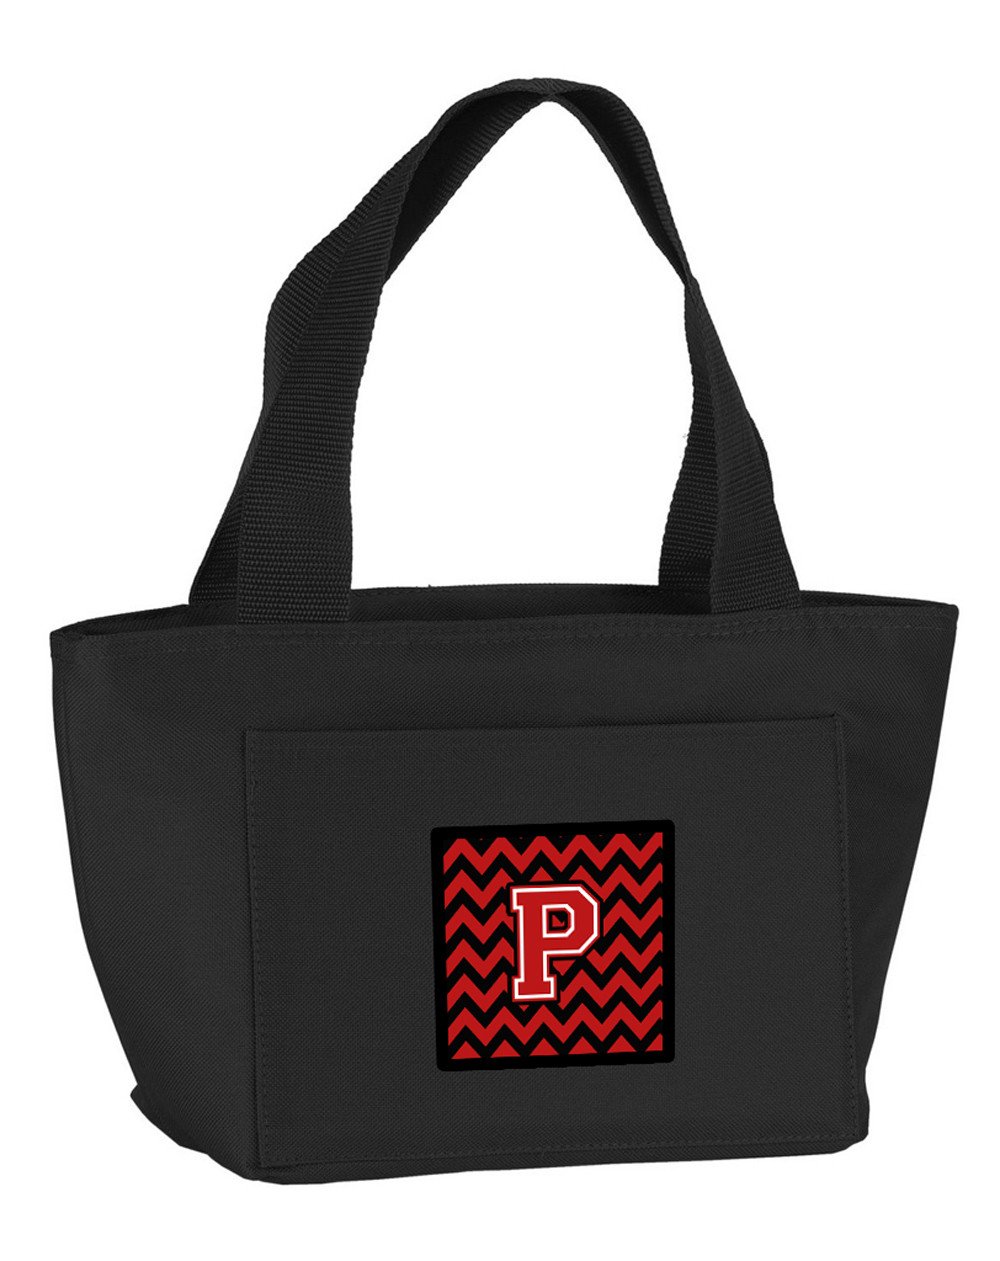 Letter P Chevron Black and Red   Lunch Bag CJ1047-PBK-8808 by Caroline's Treasures